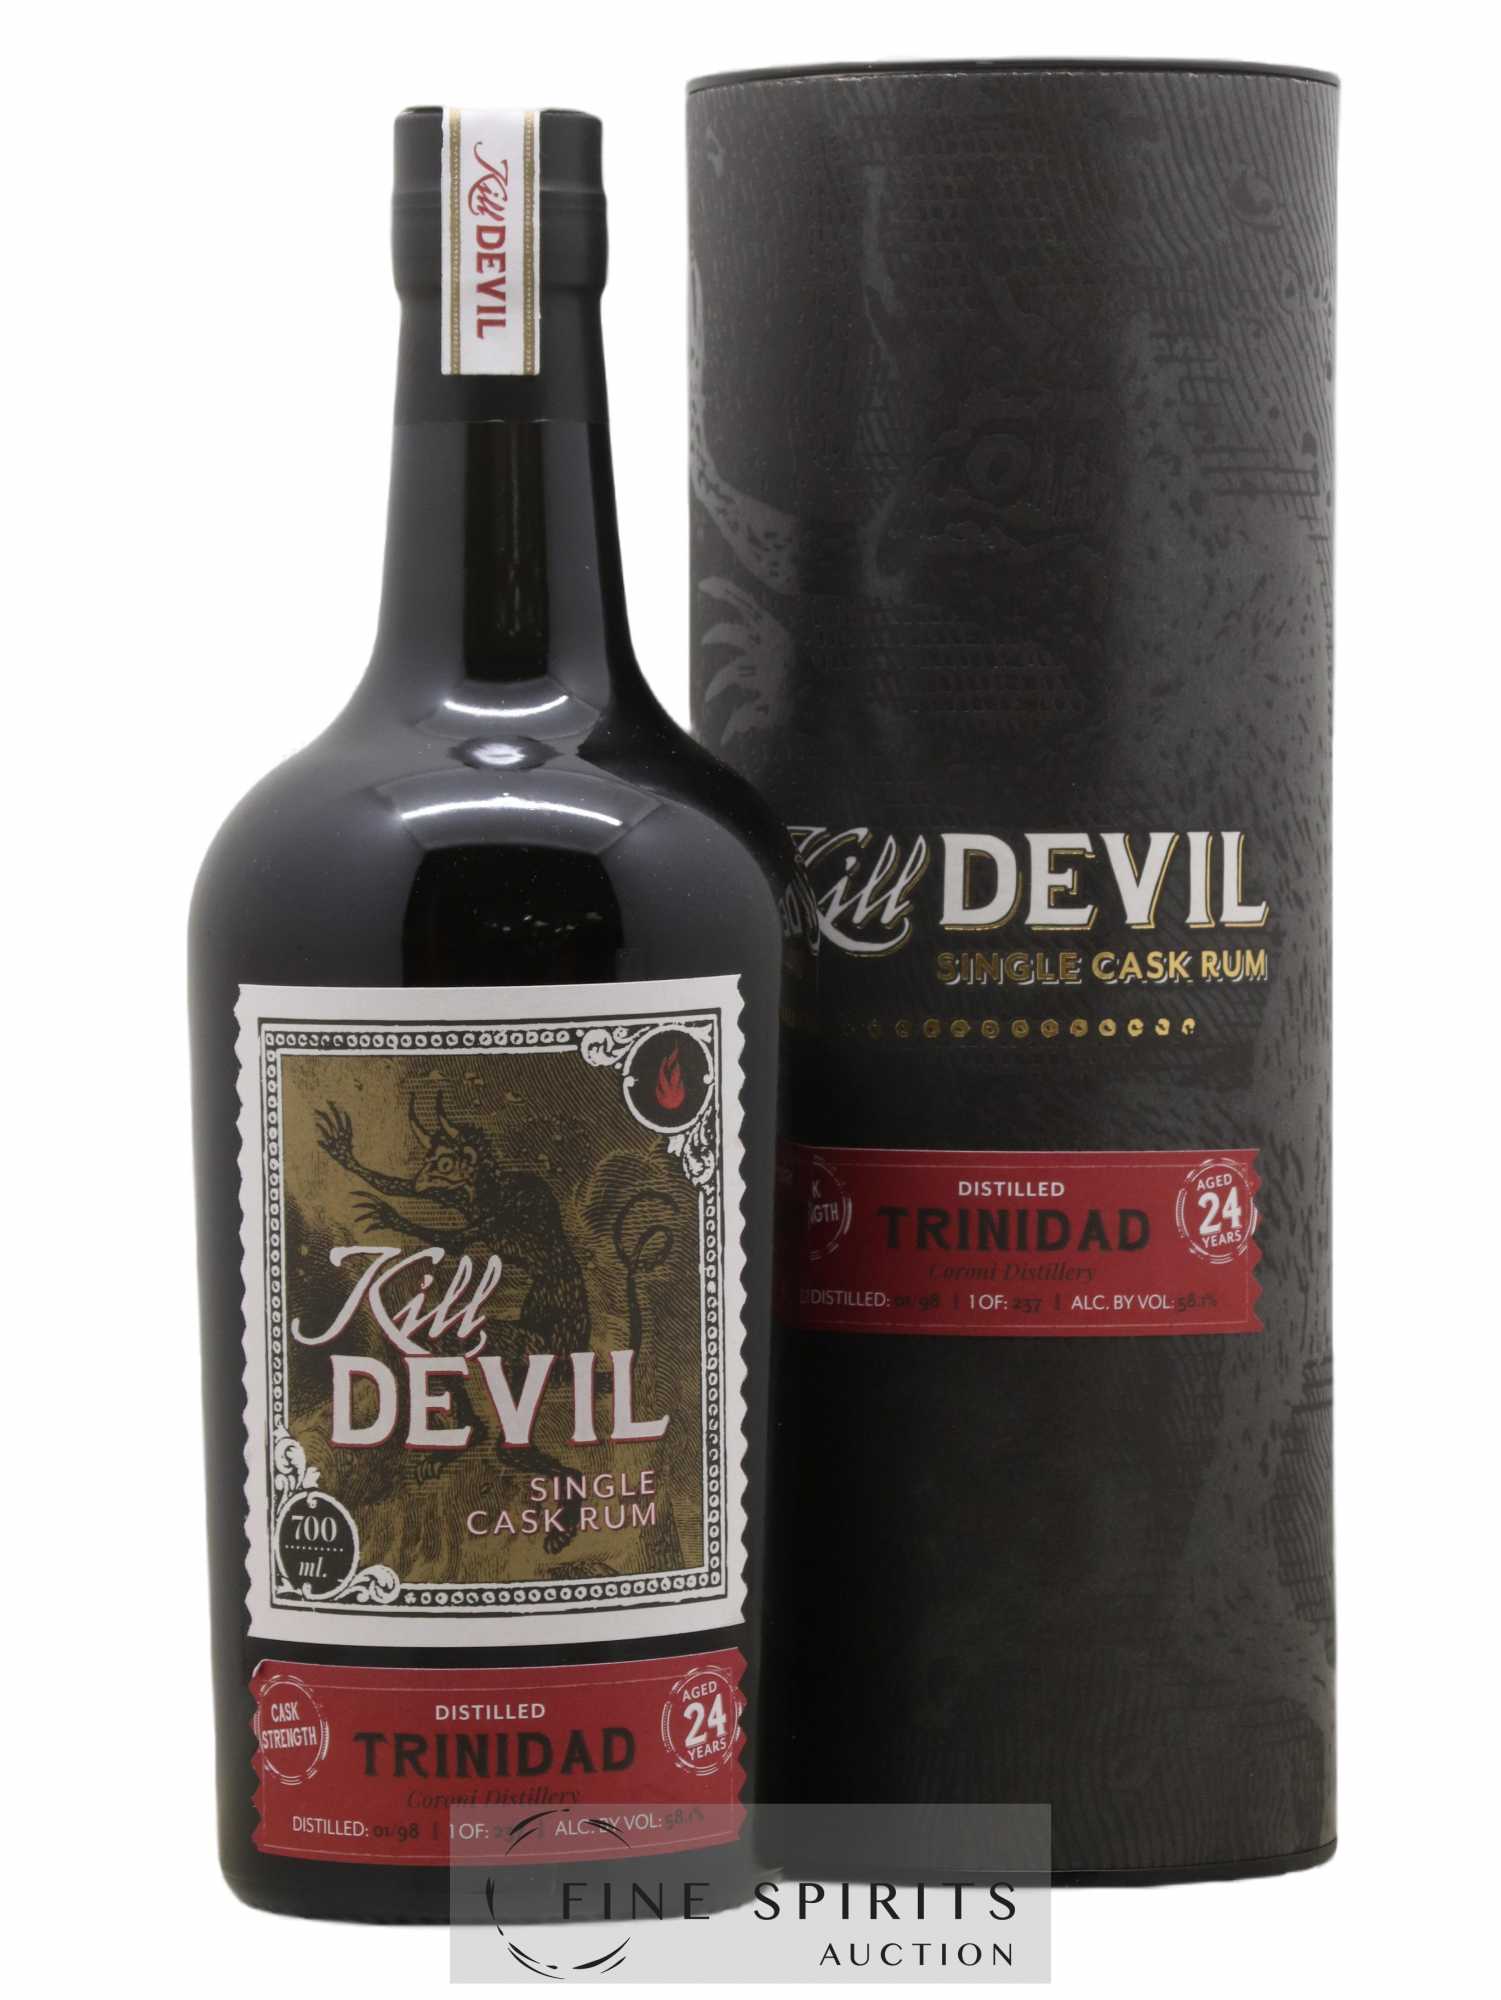 Kill Devil 24 years 1998 Edition Spirits One of 237